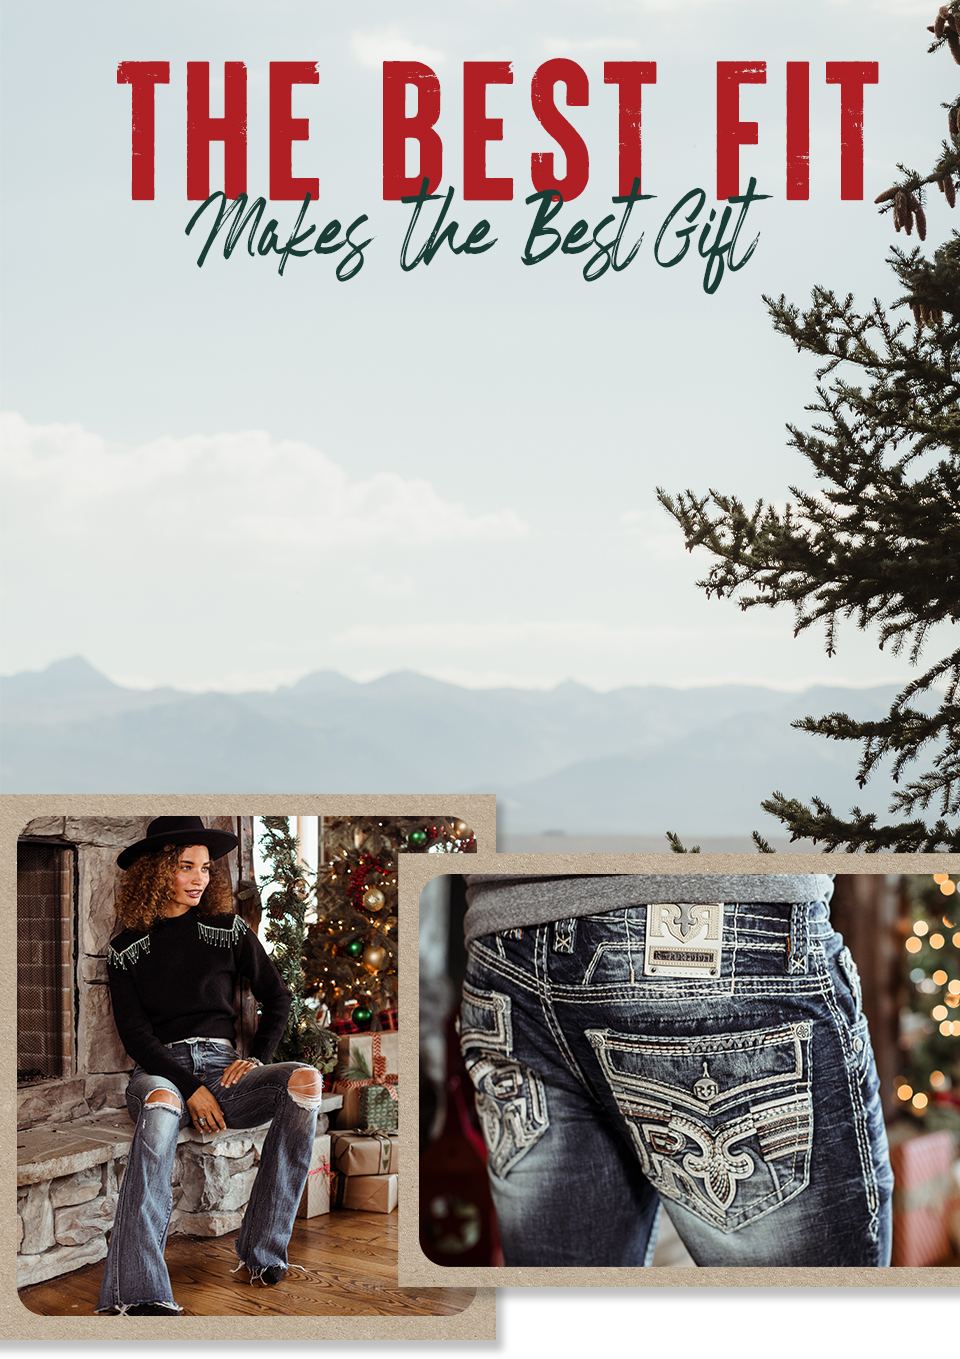 The Best Fit Makes the Best Gift - A gal wearing a black sweater with fringe and with a pair of dark wash ripped flare jeans and a pair of black boots sitting by a fireplace. A guy wearing a pair of dark wash Rock Revival jeans.